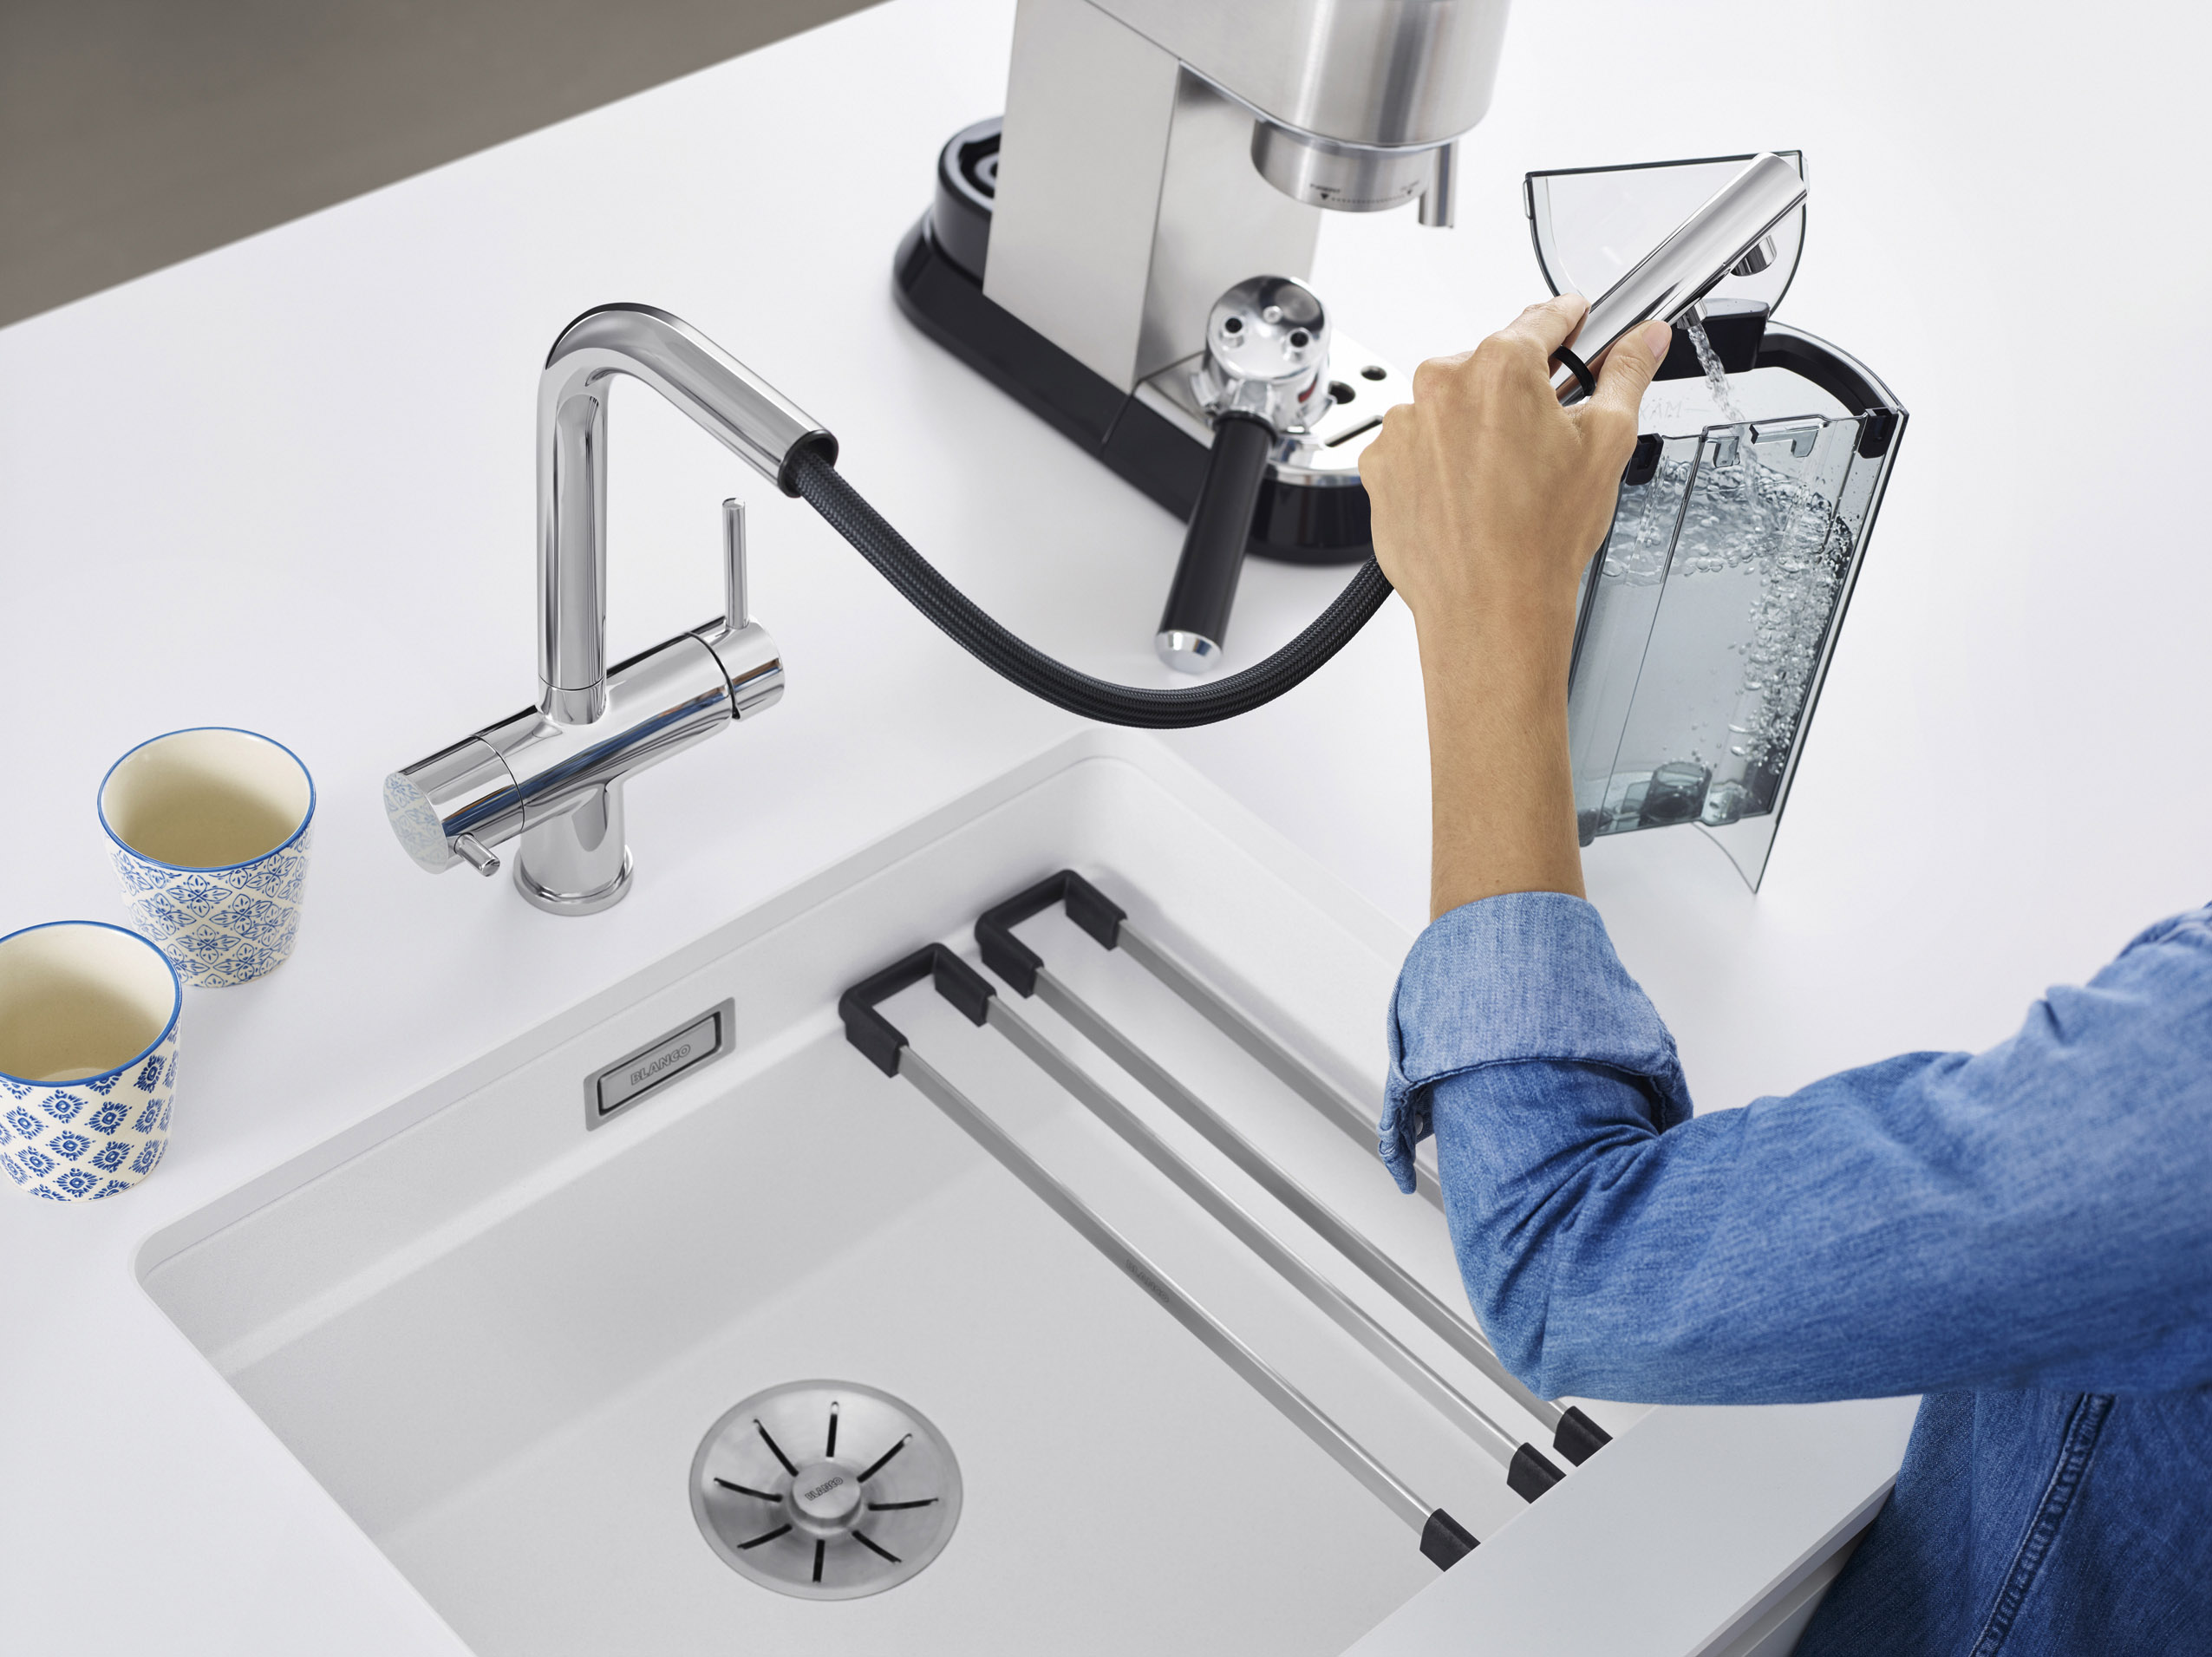 The Blanco Fontas-S II Filter is a world first – the first filter mixer tap with a pull-out spout.